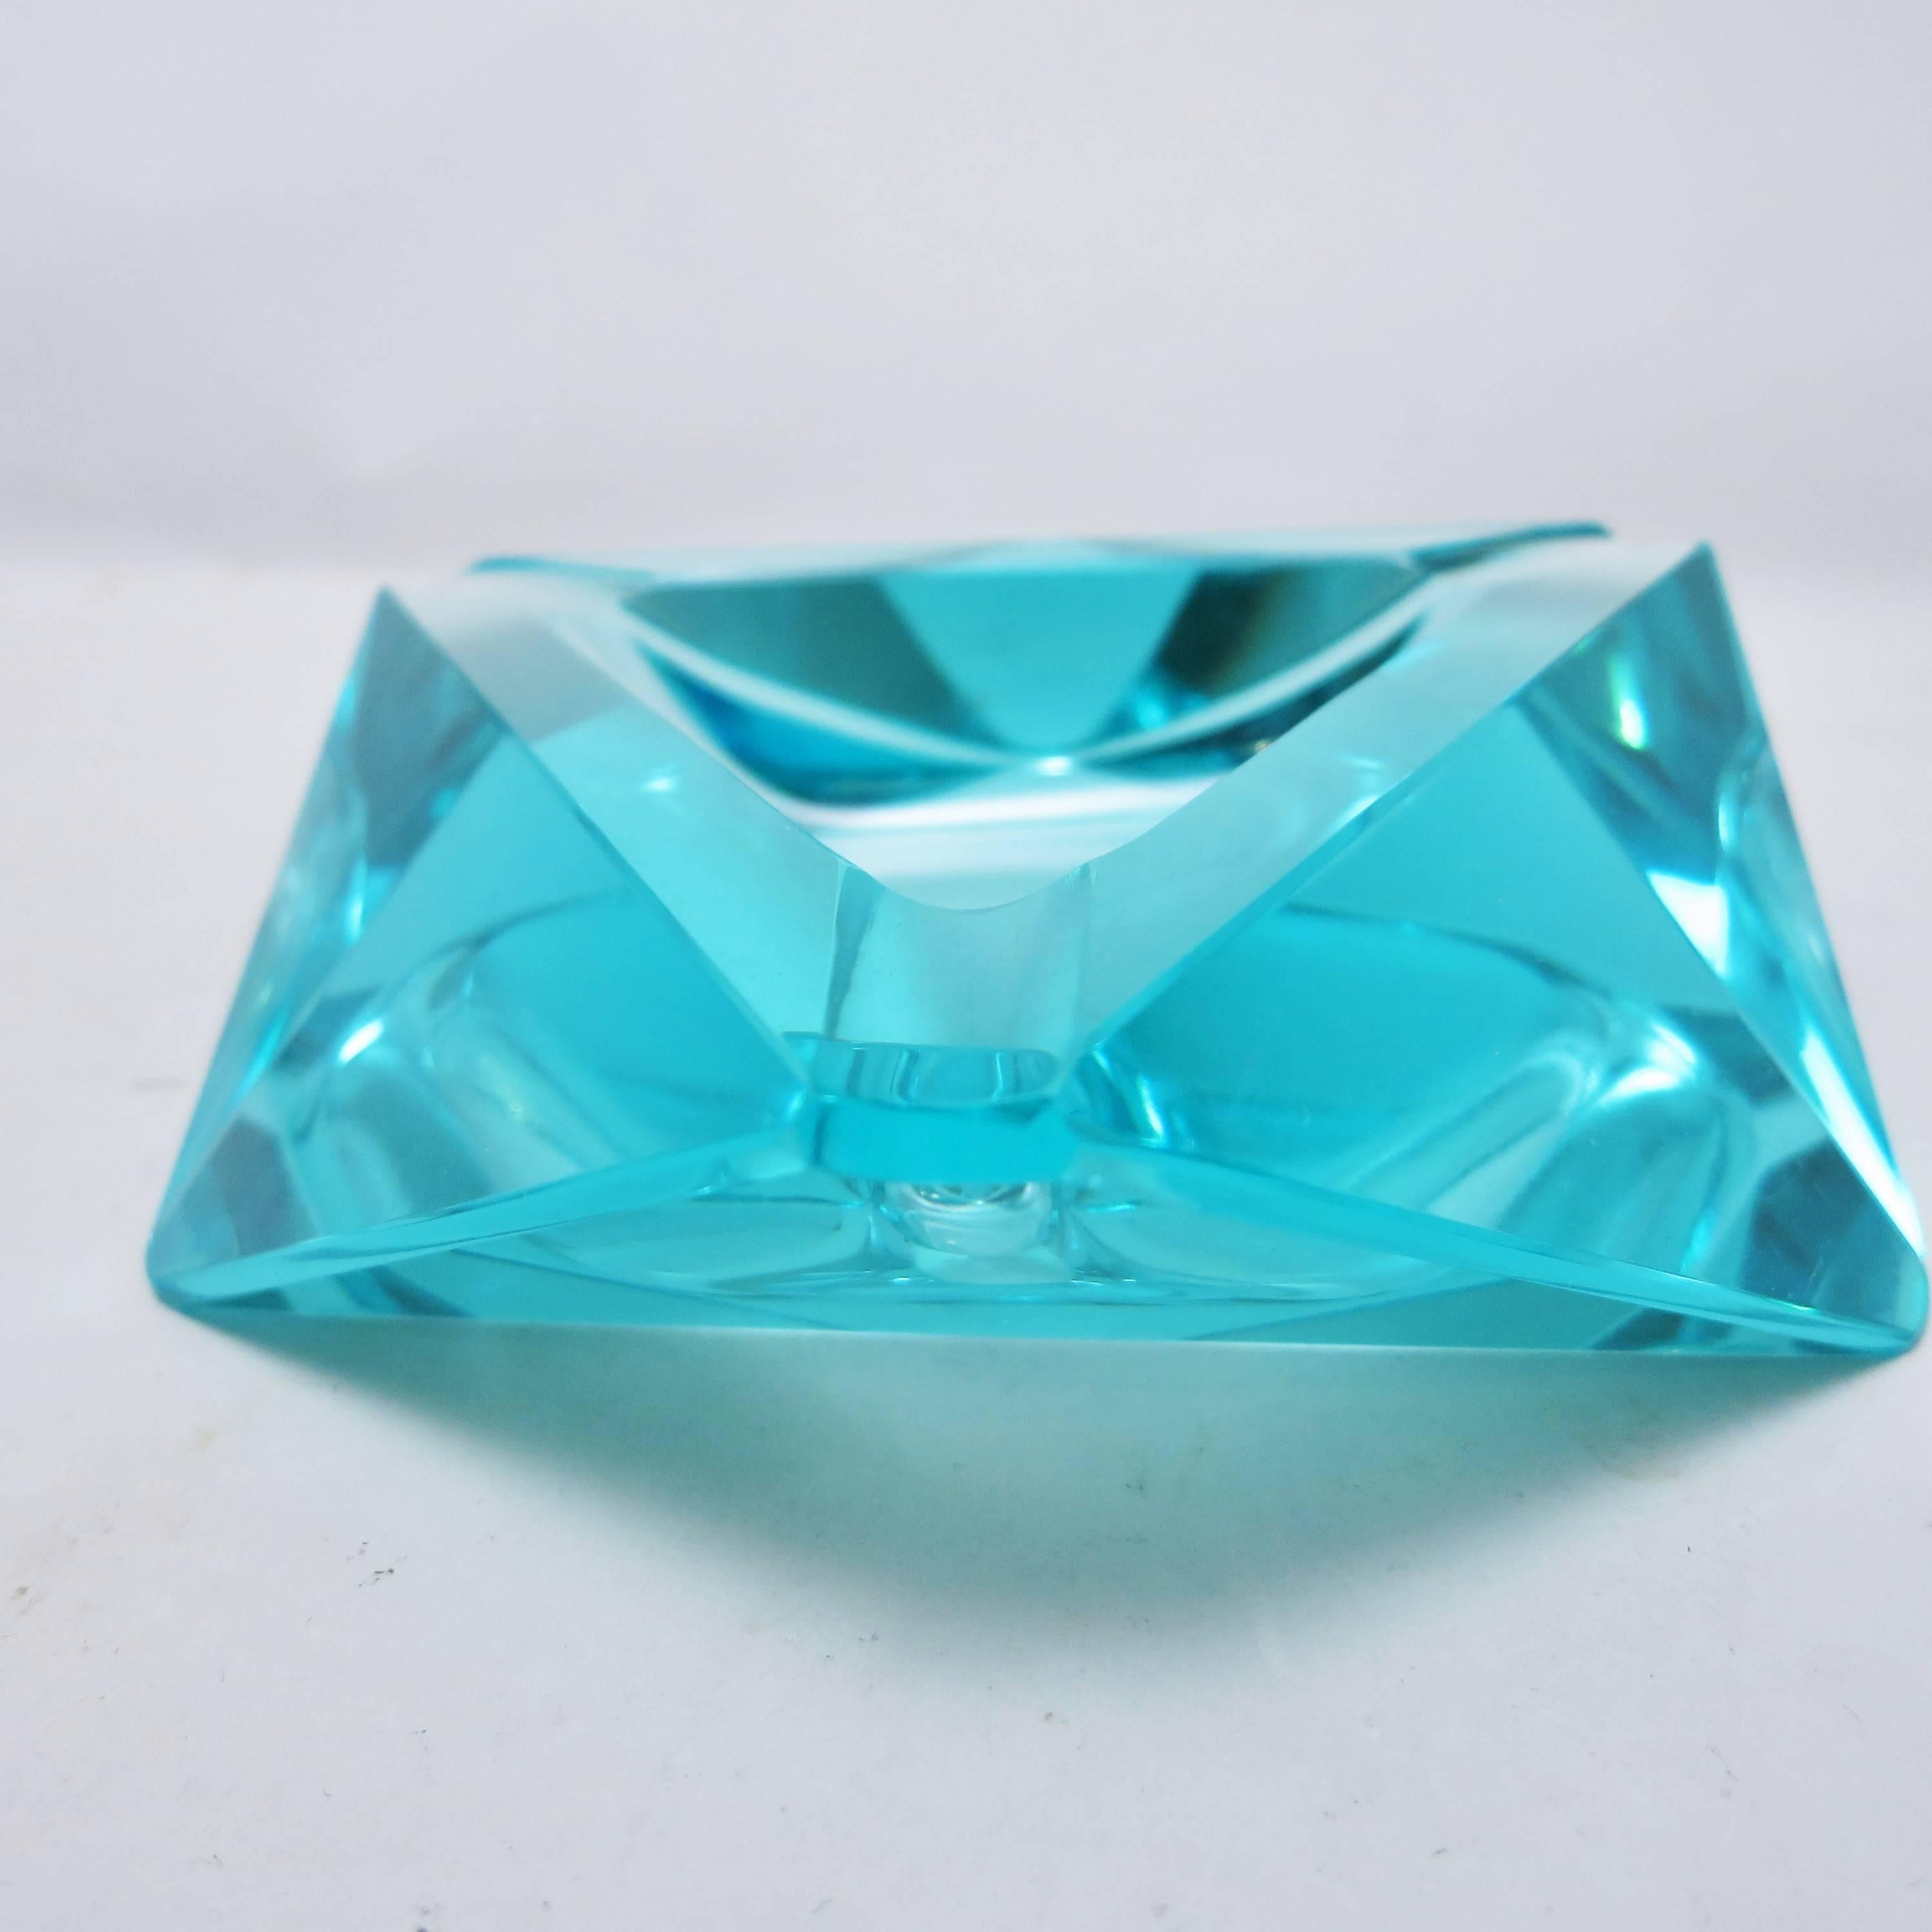 Mid-Century Modern prismatic faceted glass ashtray attributed to Fontana Arte, 1960.